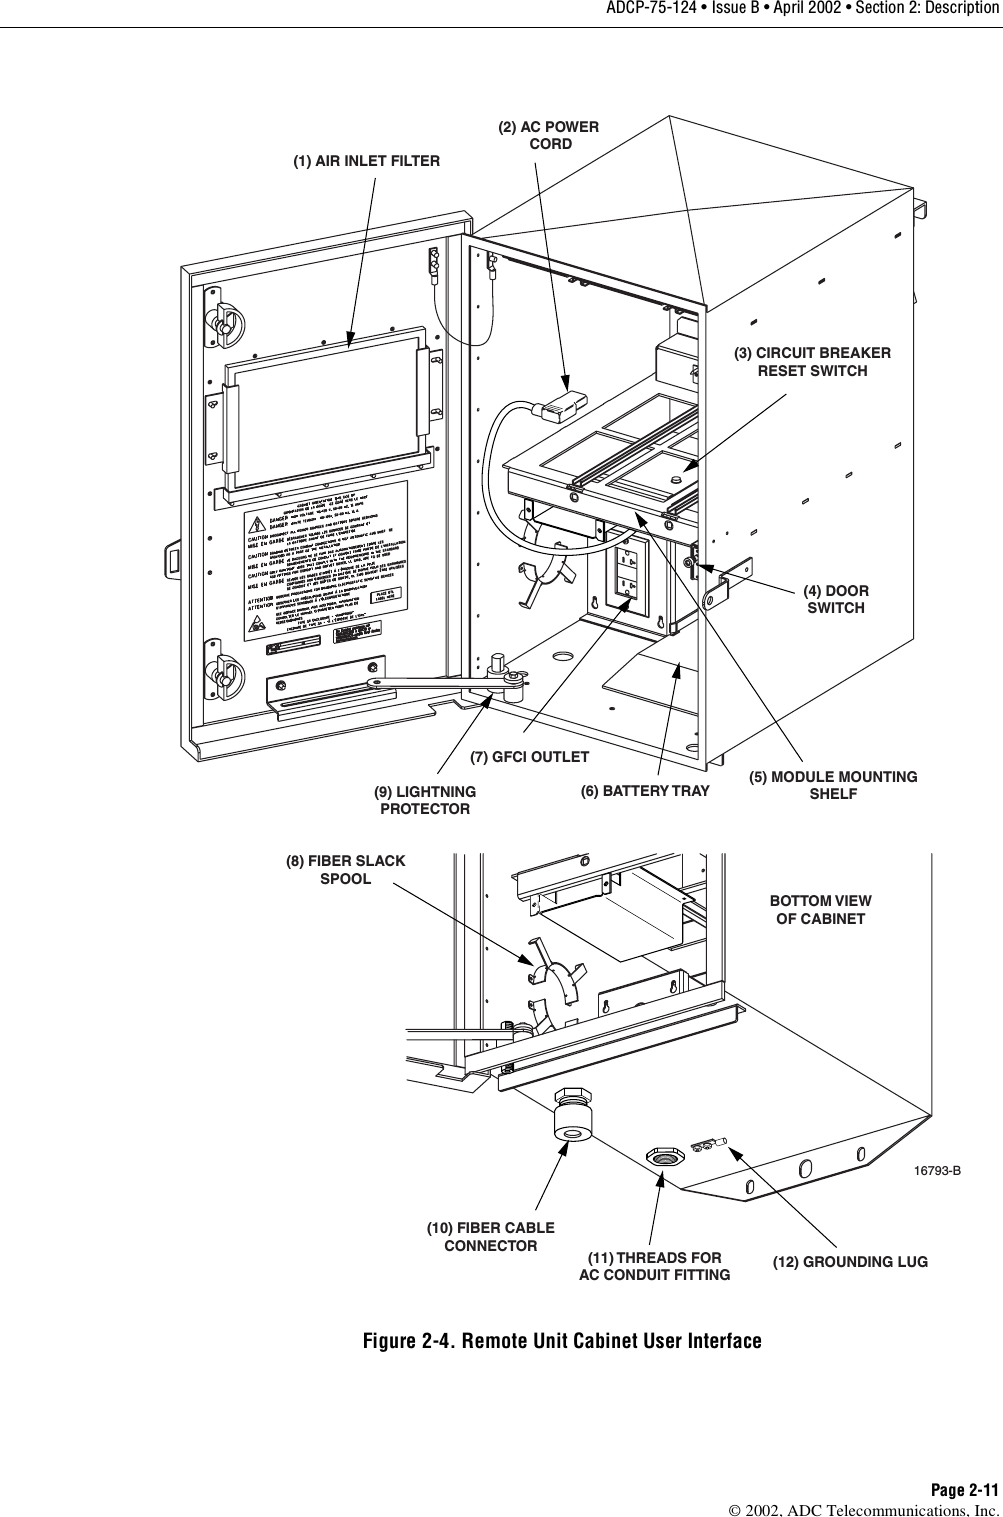 ADCP-75-124 • Issue B • April 2002 • Section 2: DescriptionPage 2-11©2002, ADC Telecommunications, Inc.Figure 2-4. Remote Unit Cabinet User InterfaceBOTTOM VIEWOF CABINET(7) GFCI OUTLET(4) DOORSWITCH(1) AIR INLET FILTER(2) AC POWER CORD(3) CIRCUIT BREAKERRESET SWITCH(5) MODULE MOUNTINGSHELF(6) BATTERY TRAY(8) FIBER SLACKSPOOL(9) LIGHTNINGPROTECTOR(10) FIBER CABLECONNECTOR (11) THREADS FORAC CONDUIT FITTING (12) GROUNDING LUG16793-B